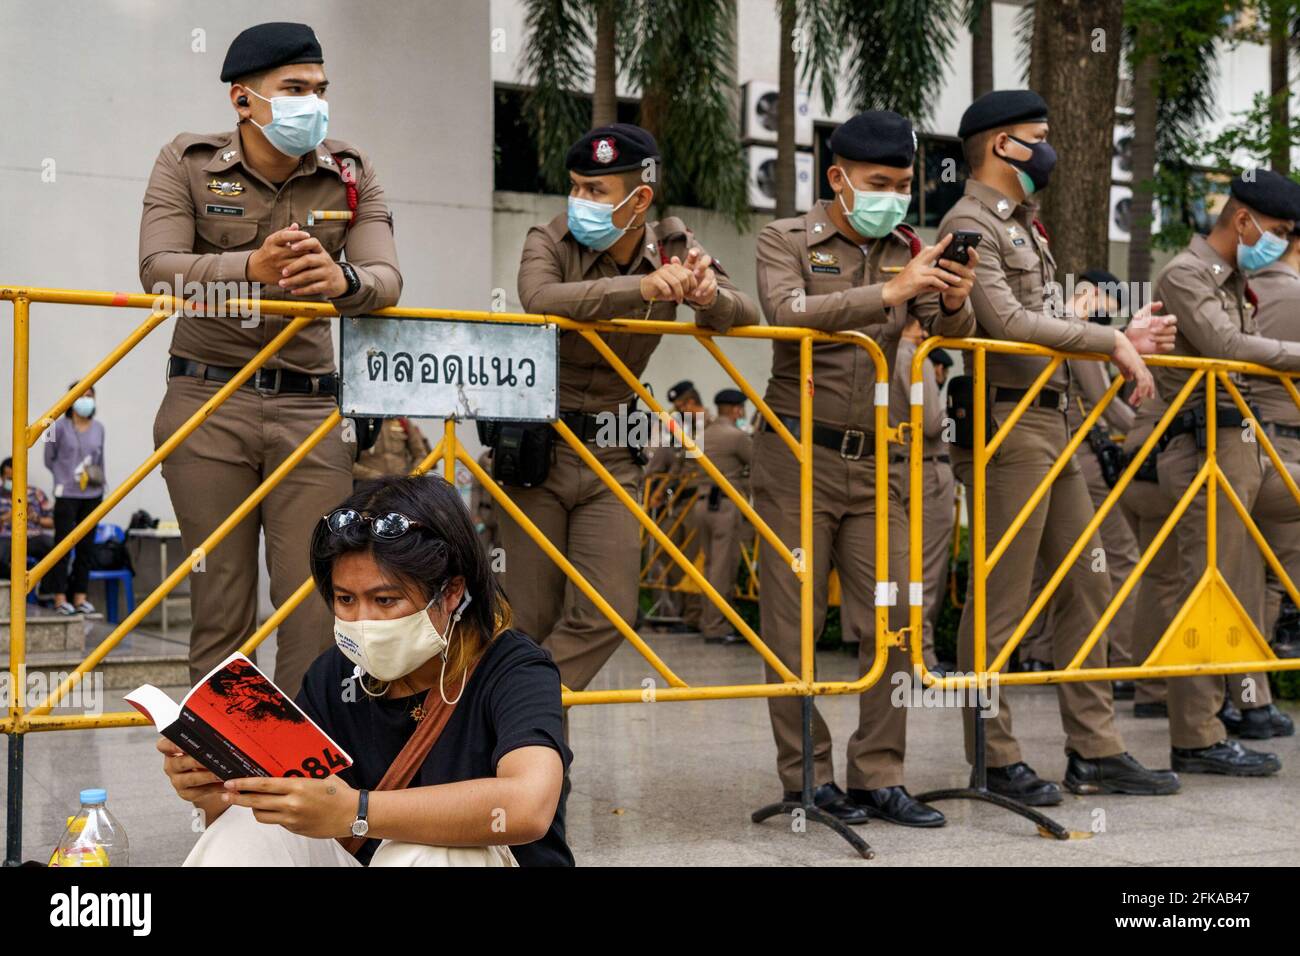 Bangkok, Thailand. 29th Apr, 2021. A protestor reading the 1984, a dystopia novel written by George Orwell, in front of a police barricade following the denial of bail requests of all 7 detained protestors, including Penguin who is on his 45th day of hunger strike. Parit 'Penguin' Chiwarak's condition worsens and other 6 pro-democracy leaders as they remain in custody for lesse-majeste law aka article 112 at the Criminal Court that saw no reason to change its previous orders. Credit: SOPA Images Limited/Alamy Live News Stock Photo